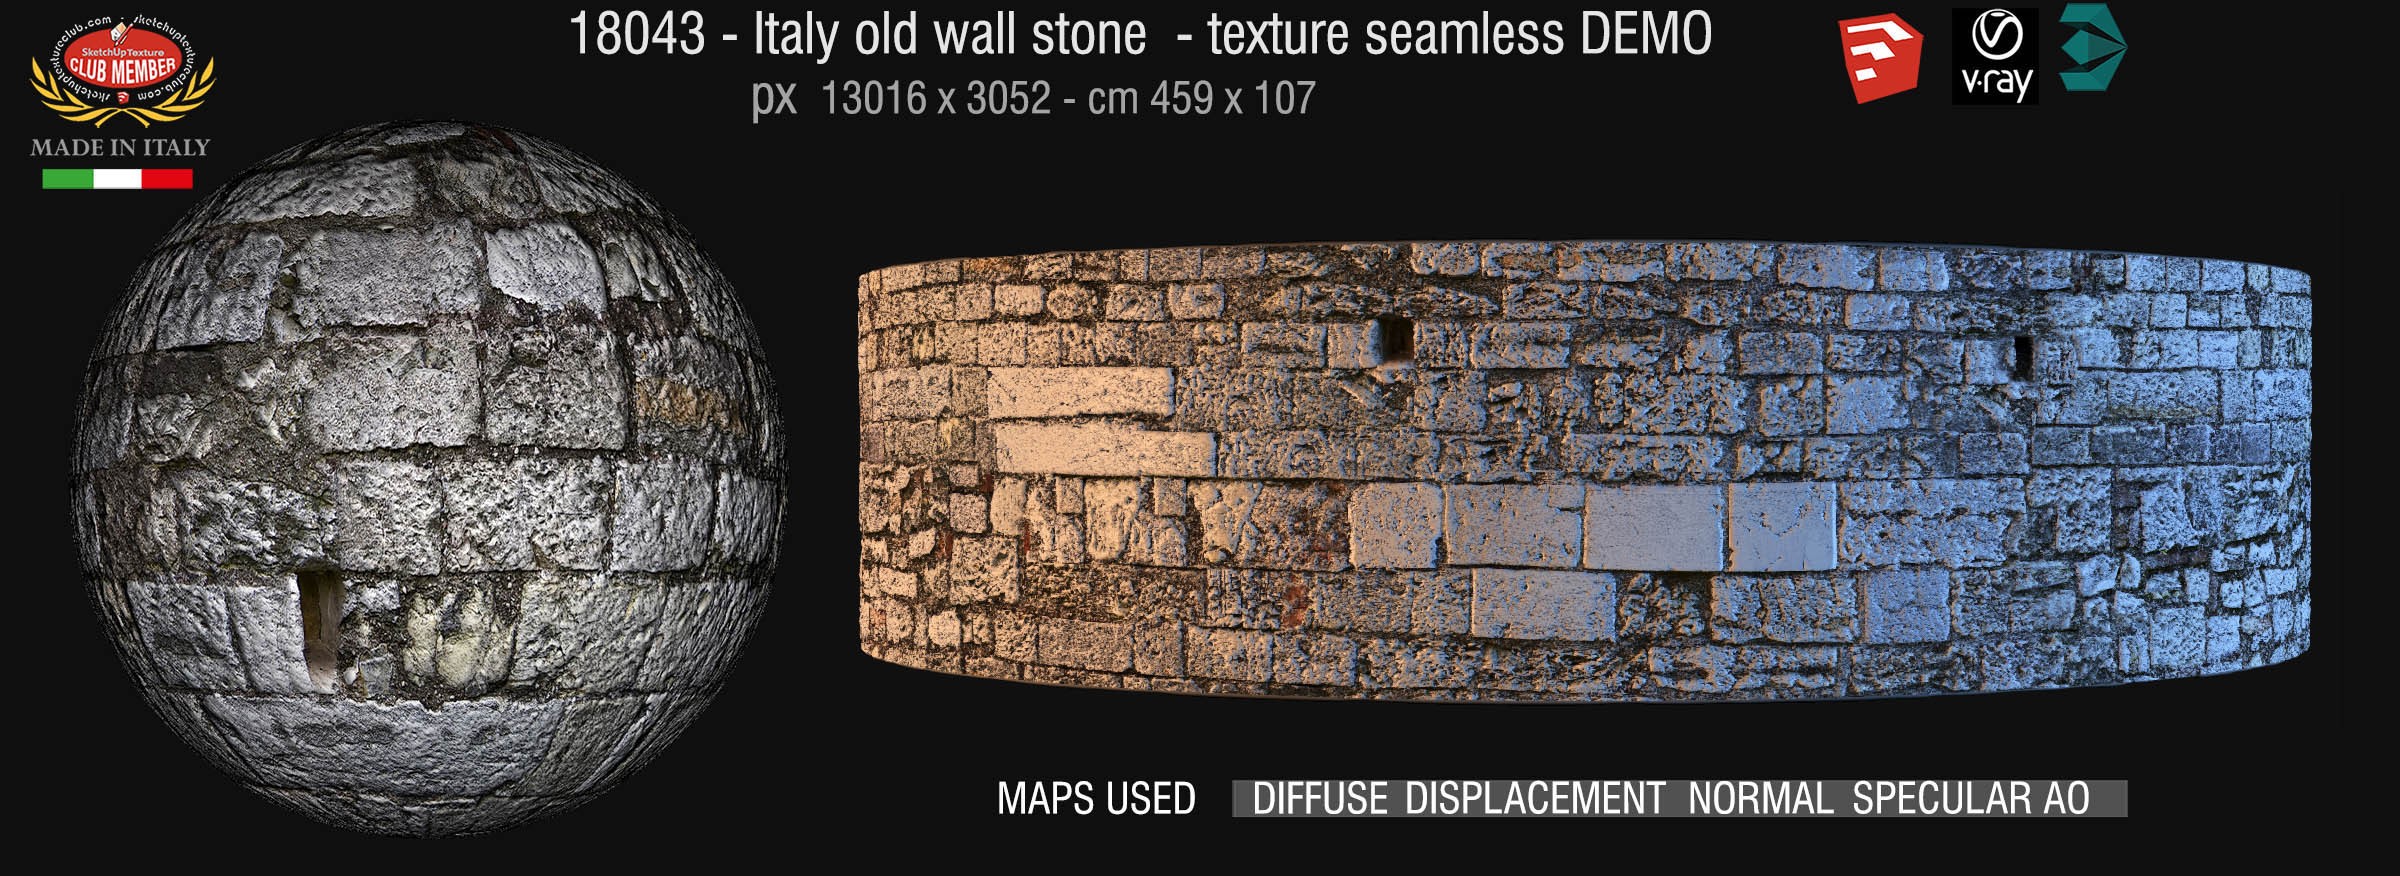 18043 Italy old wall stone 14th century texture seamless + maps DEMO